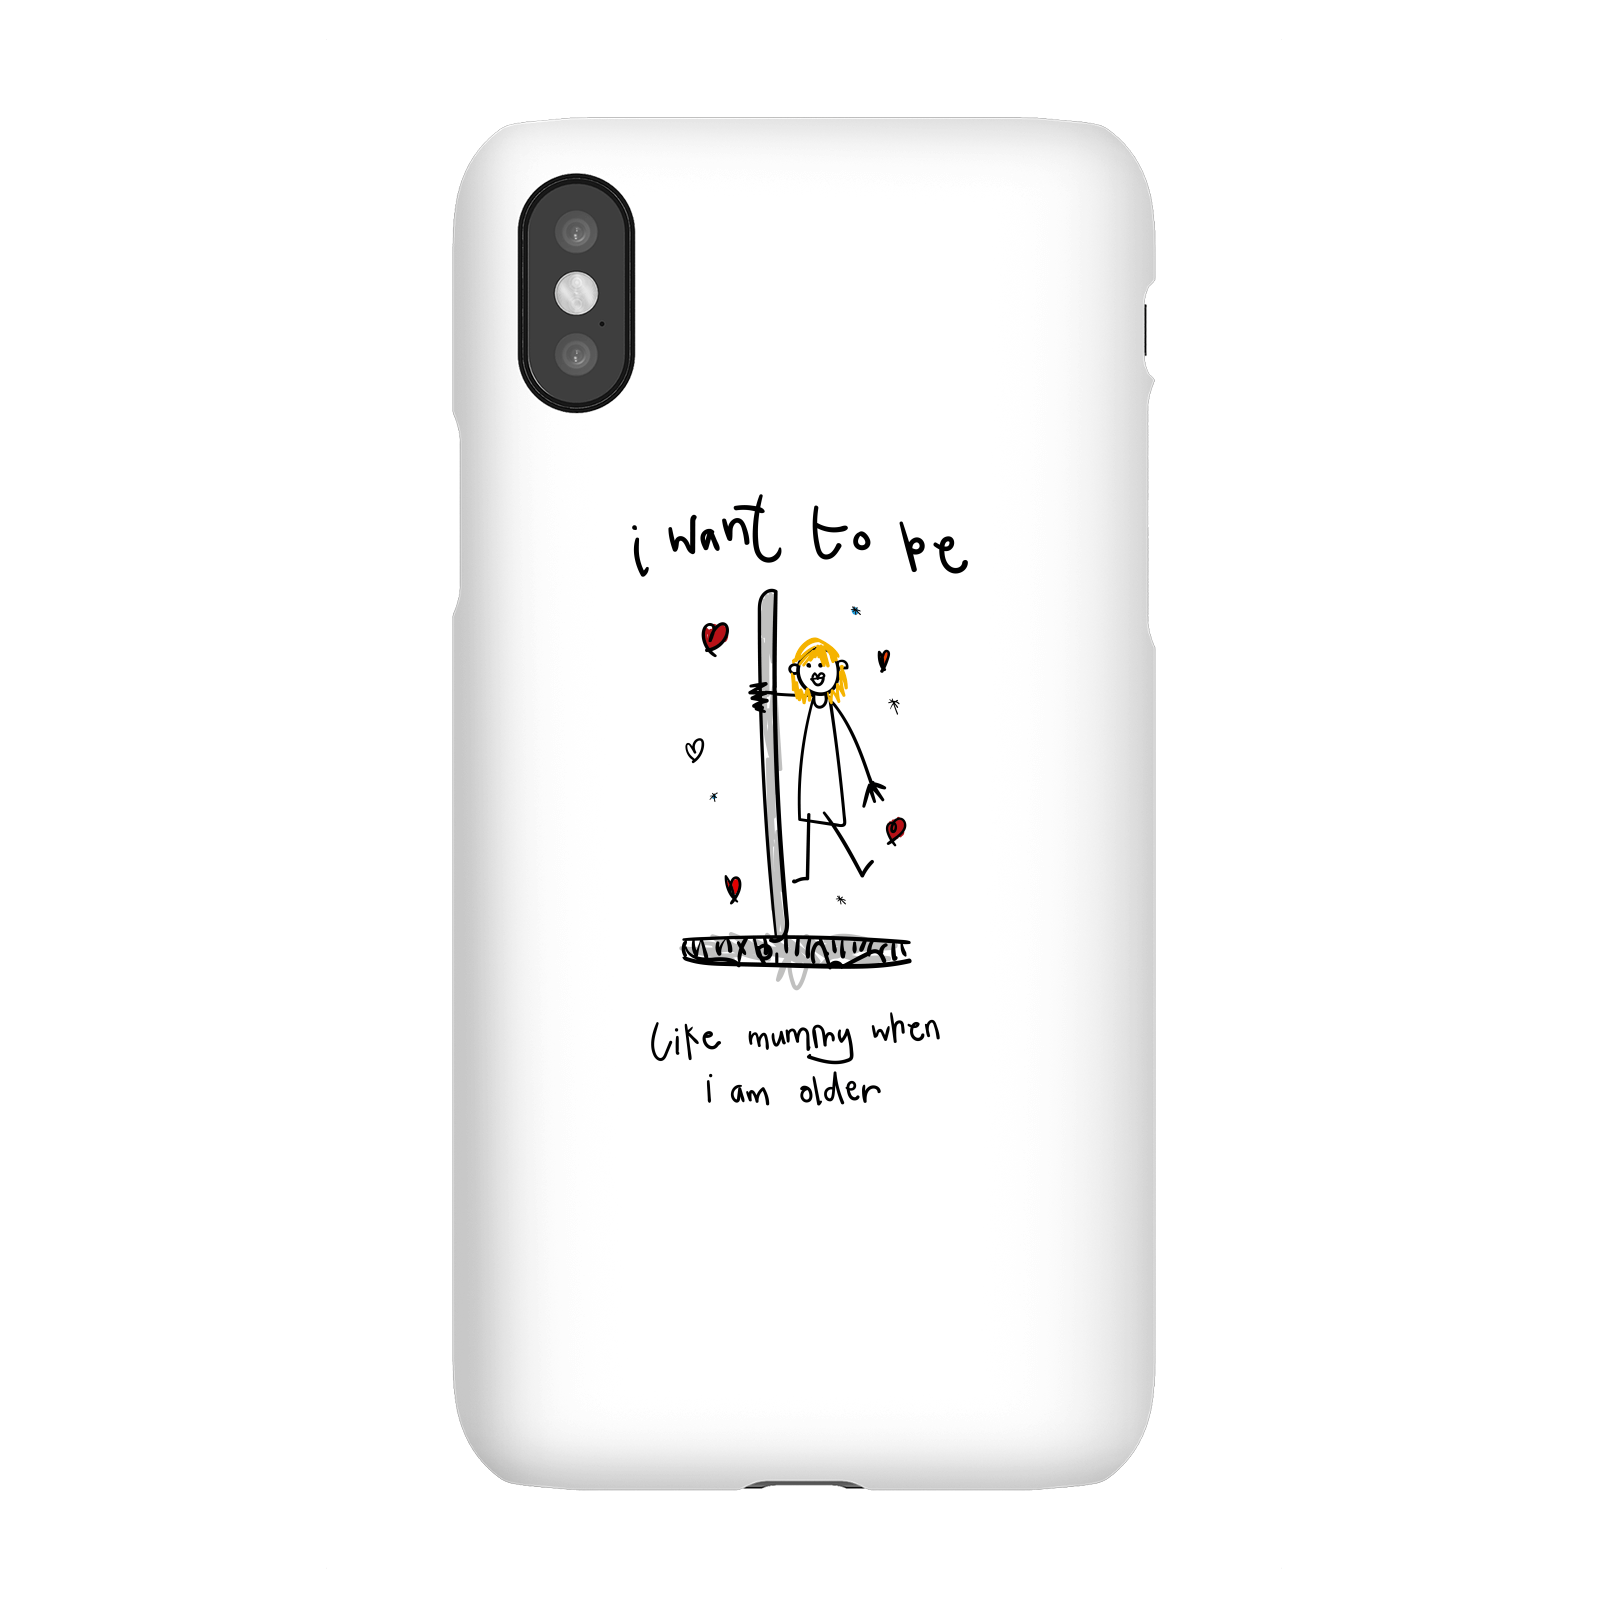 I Want To Be Like Mummy When I'm Older Phone Case for iPhone and Android - Samsung Note 8 - Tough Case - Gloss